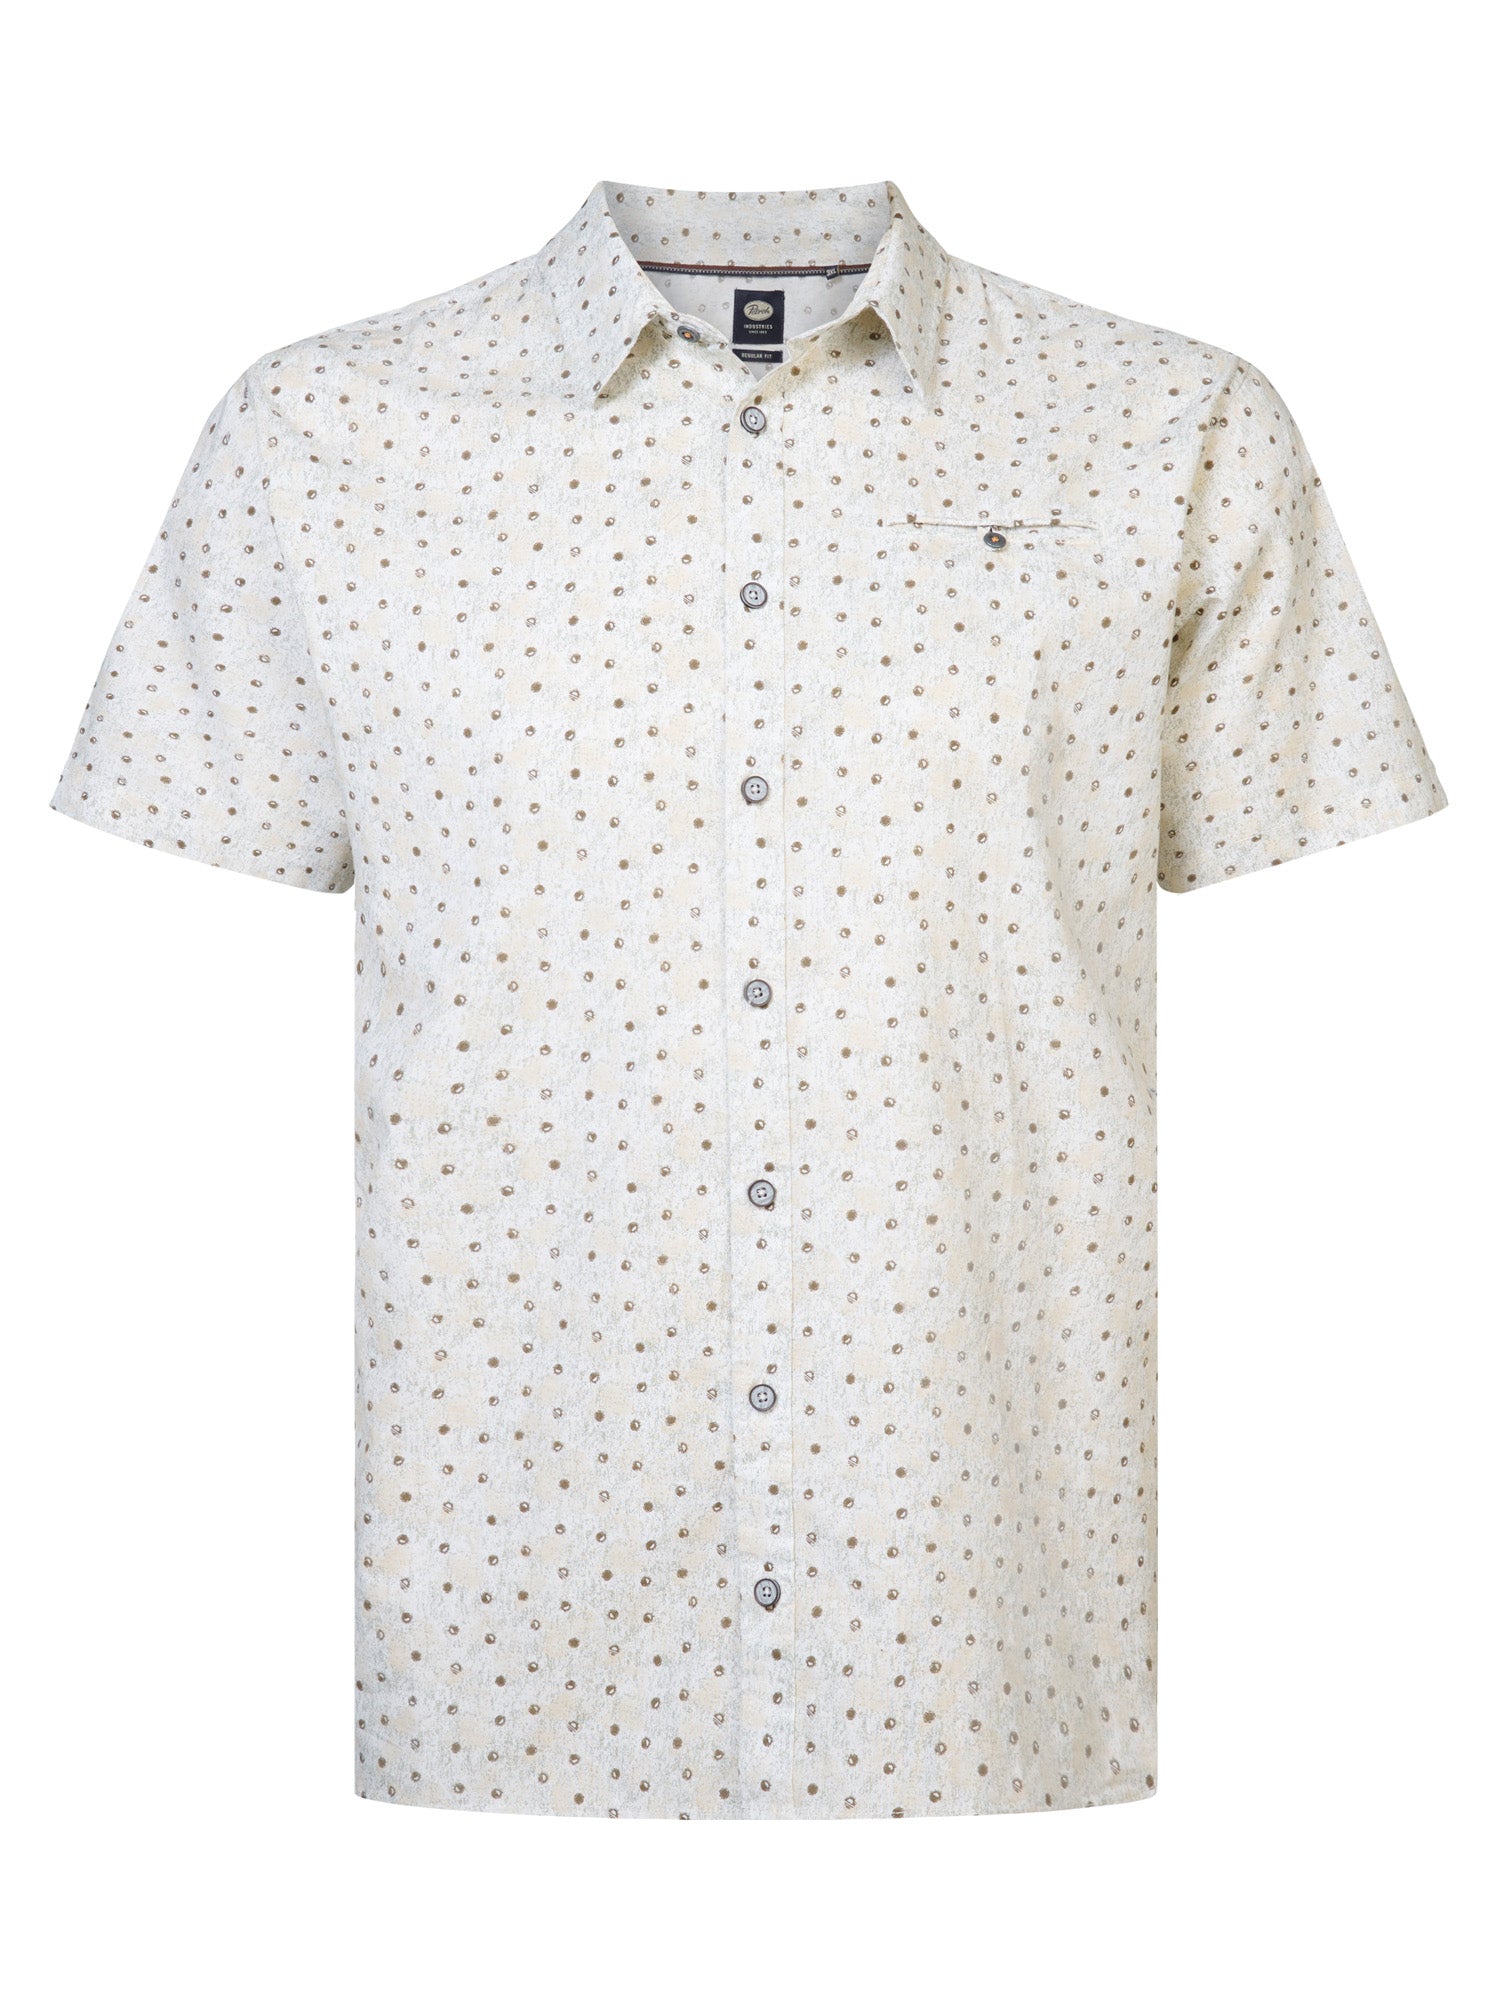 Plus Size All-over Print Shirt Rockport Beach | Official Petrol Industries®  Online Store